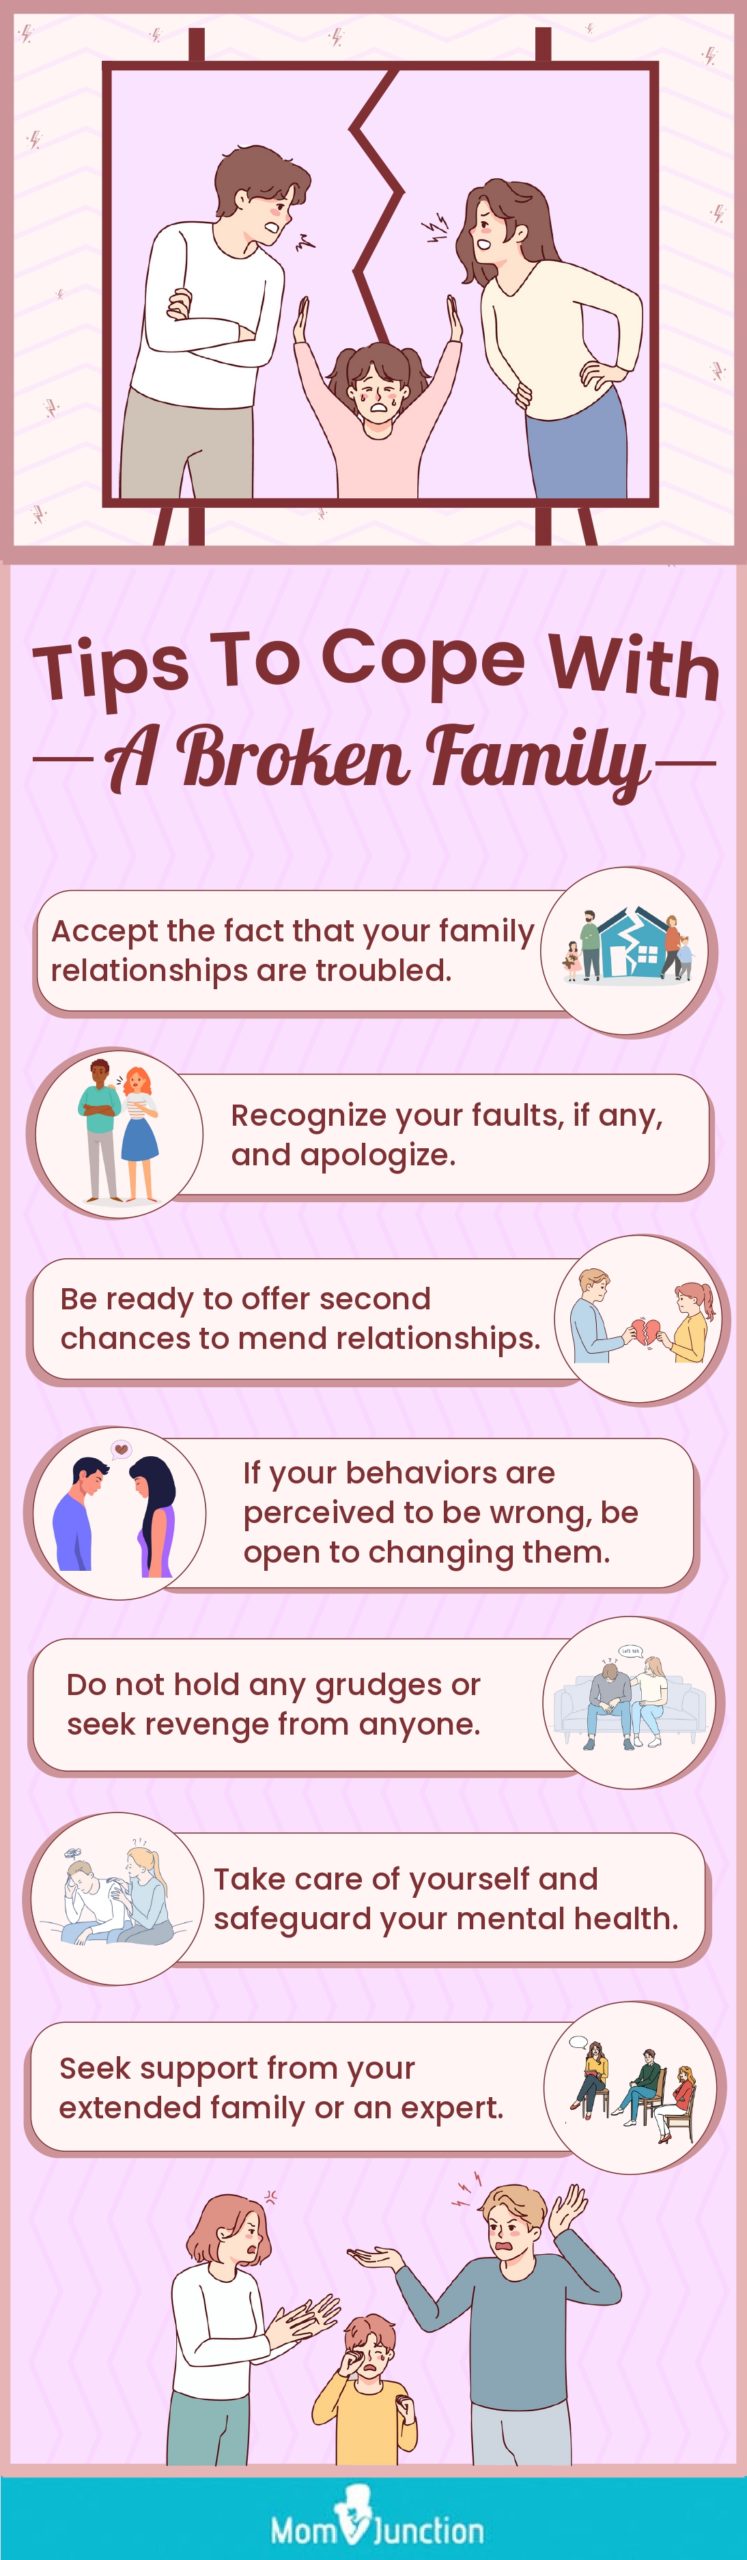 tips to cope with a broken family (infographic)